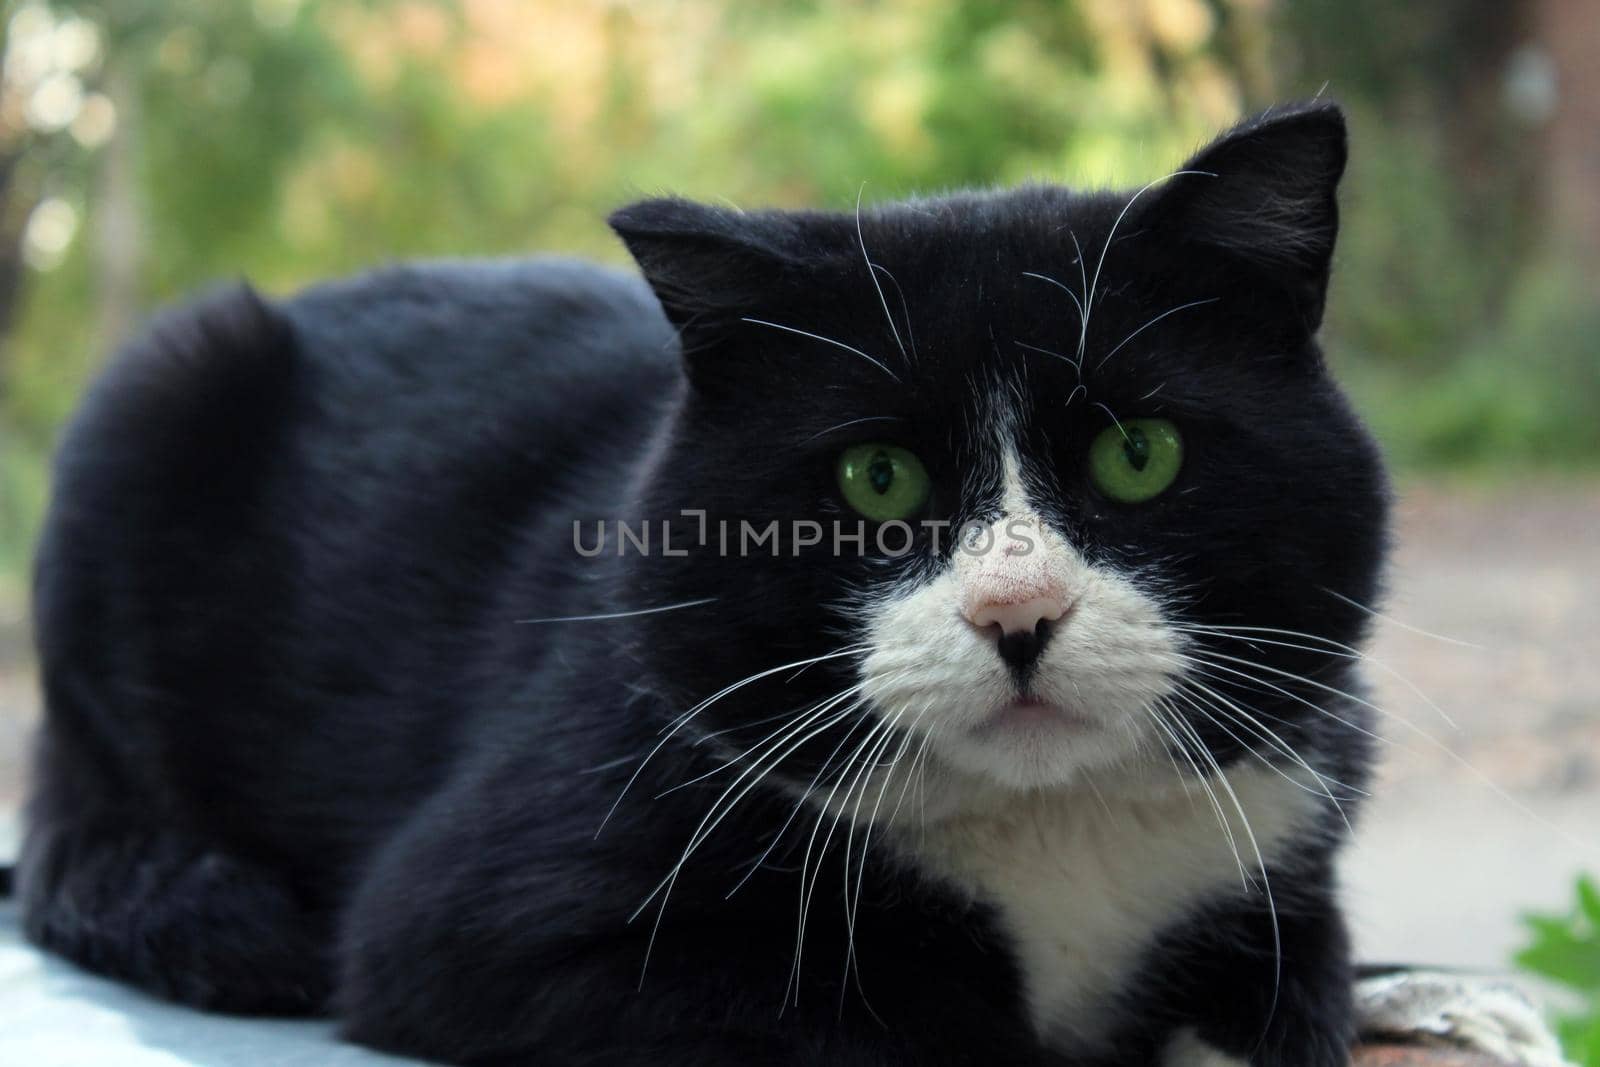 A large black cat with a white muzzle and green eyes close-up looks straight ahead